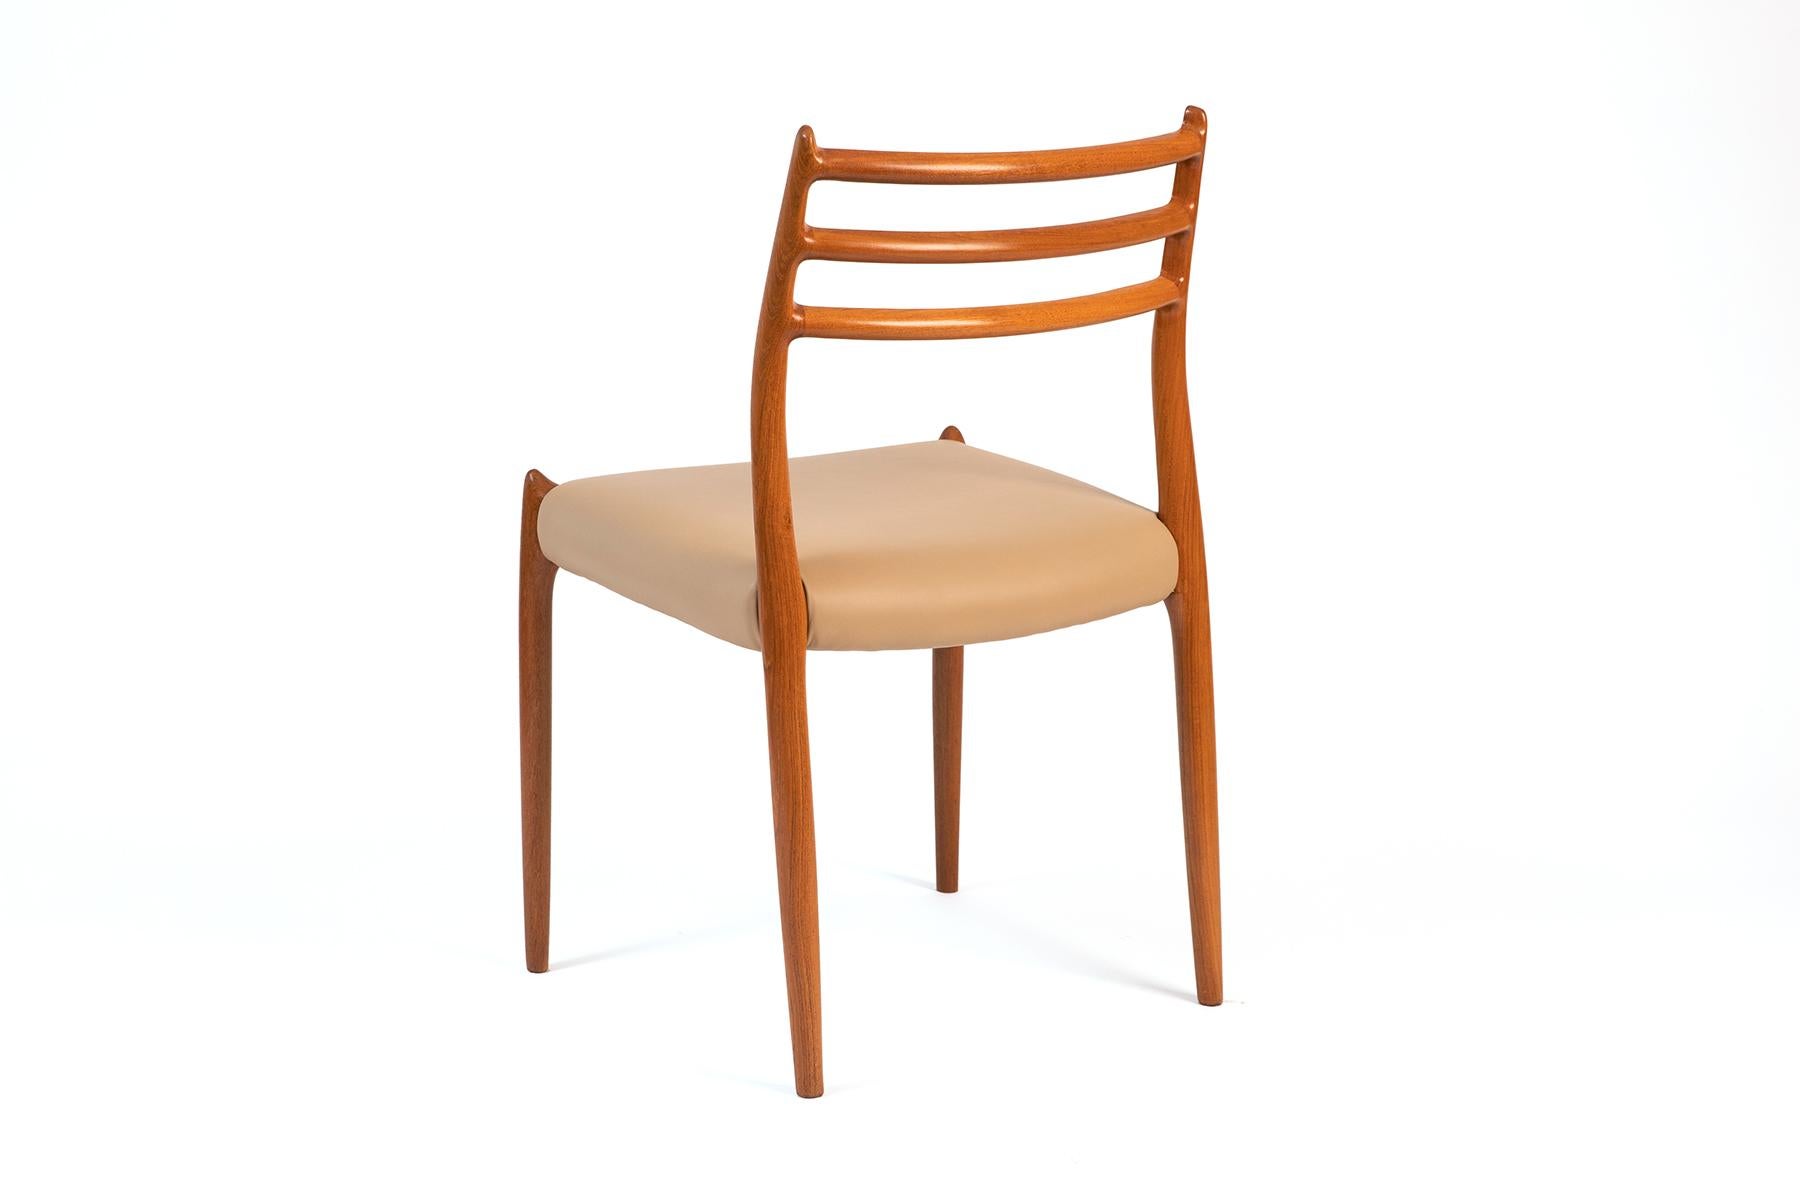 Mid-20th Century Teak Ladder-Back Dining Chairs by Møller, set of 4 For Sale